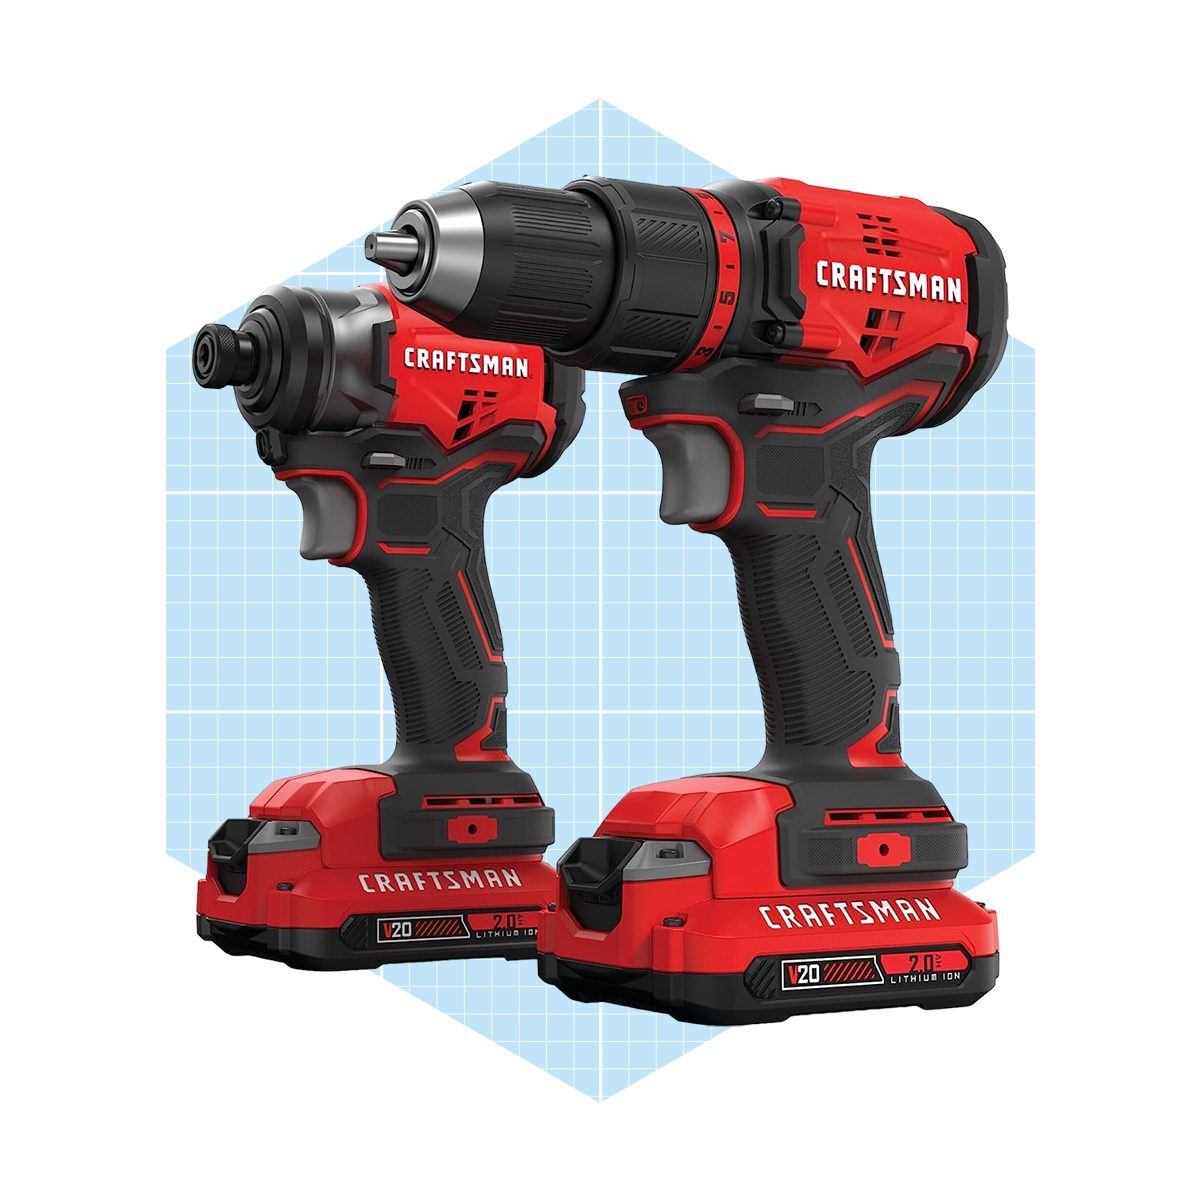 Prime Day 1 Tools and Power Deals! 